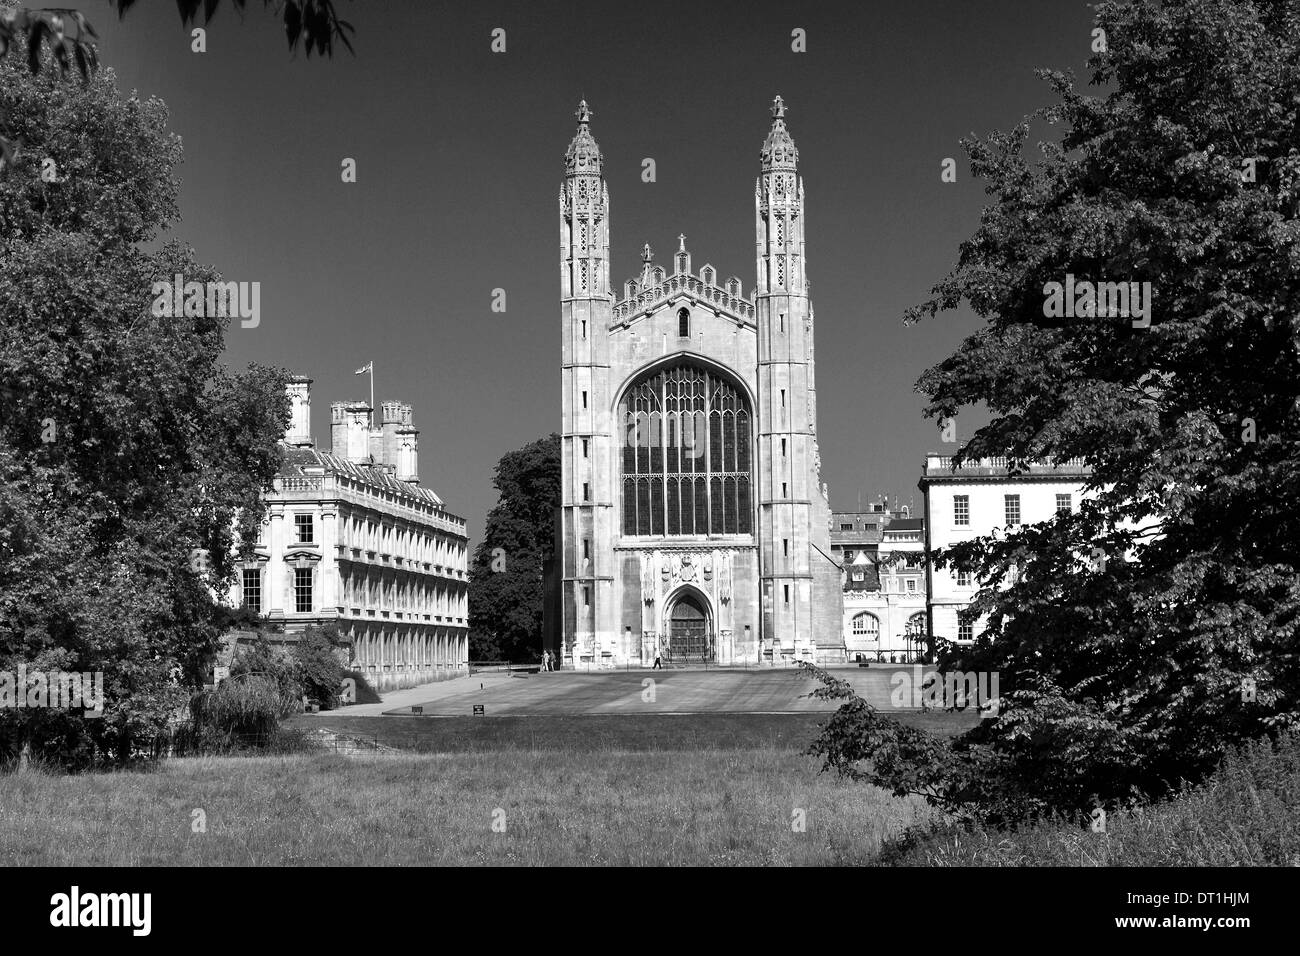 Summertime view from the Backs pastures to Kings College Chapel, University City of Cambridge, Cambridgeshire, England, UK Stock Photo